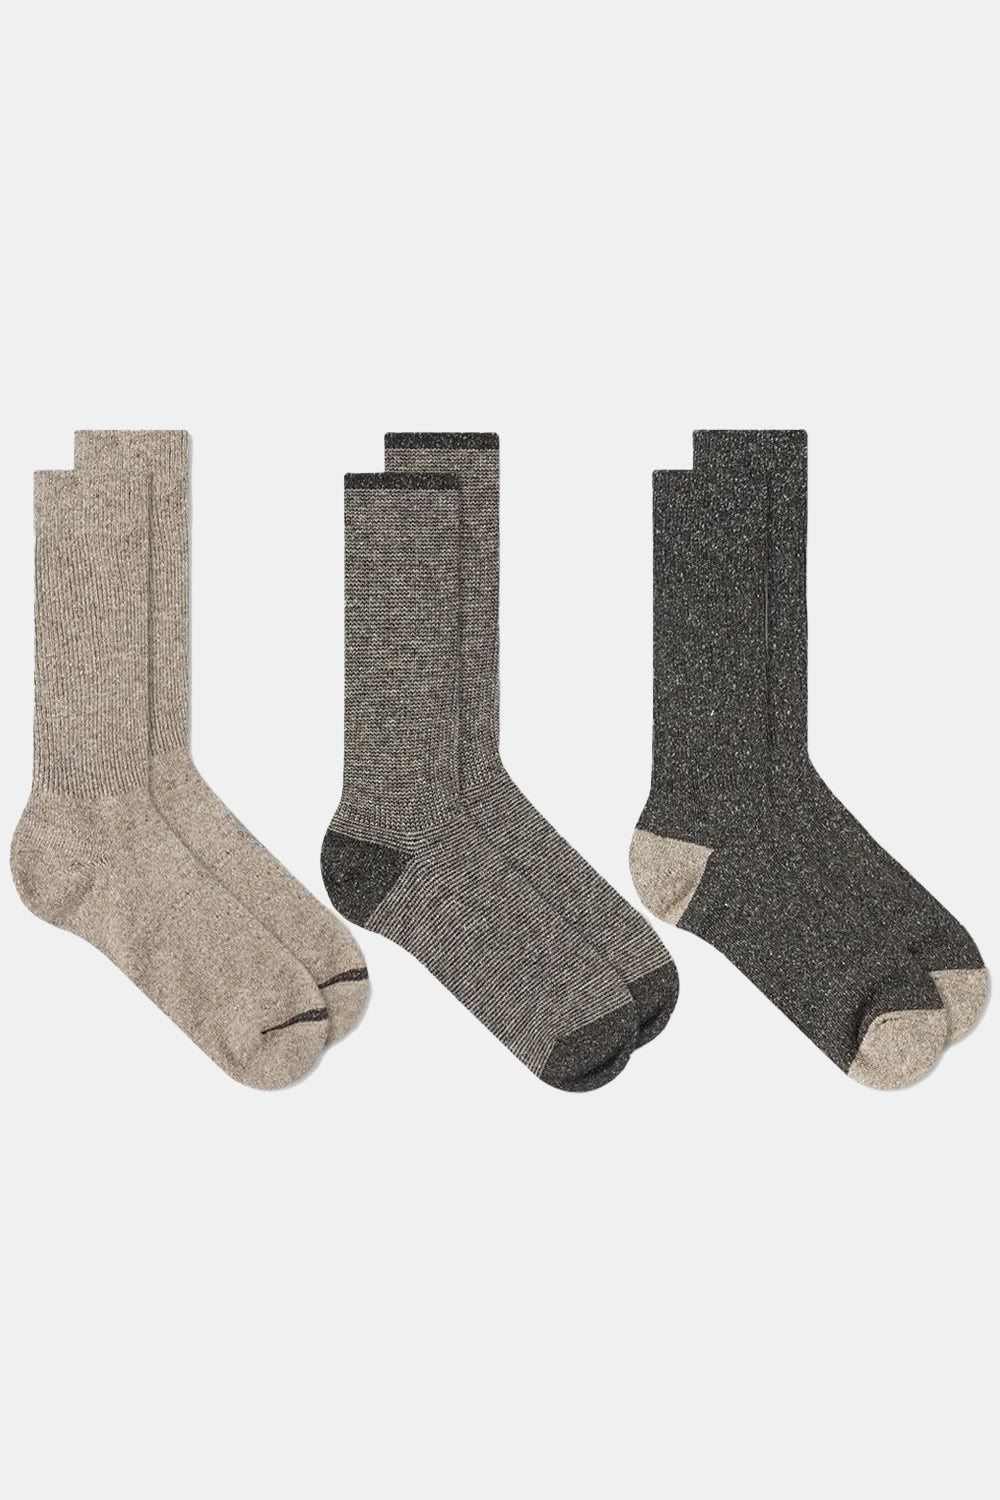 Anonymous Ism Nep Amerib Pack of Three Crew Socks (Charcoal Grey/Speck) | Number Six